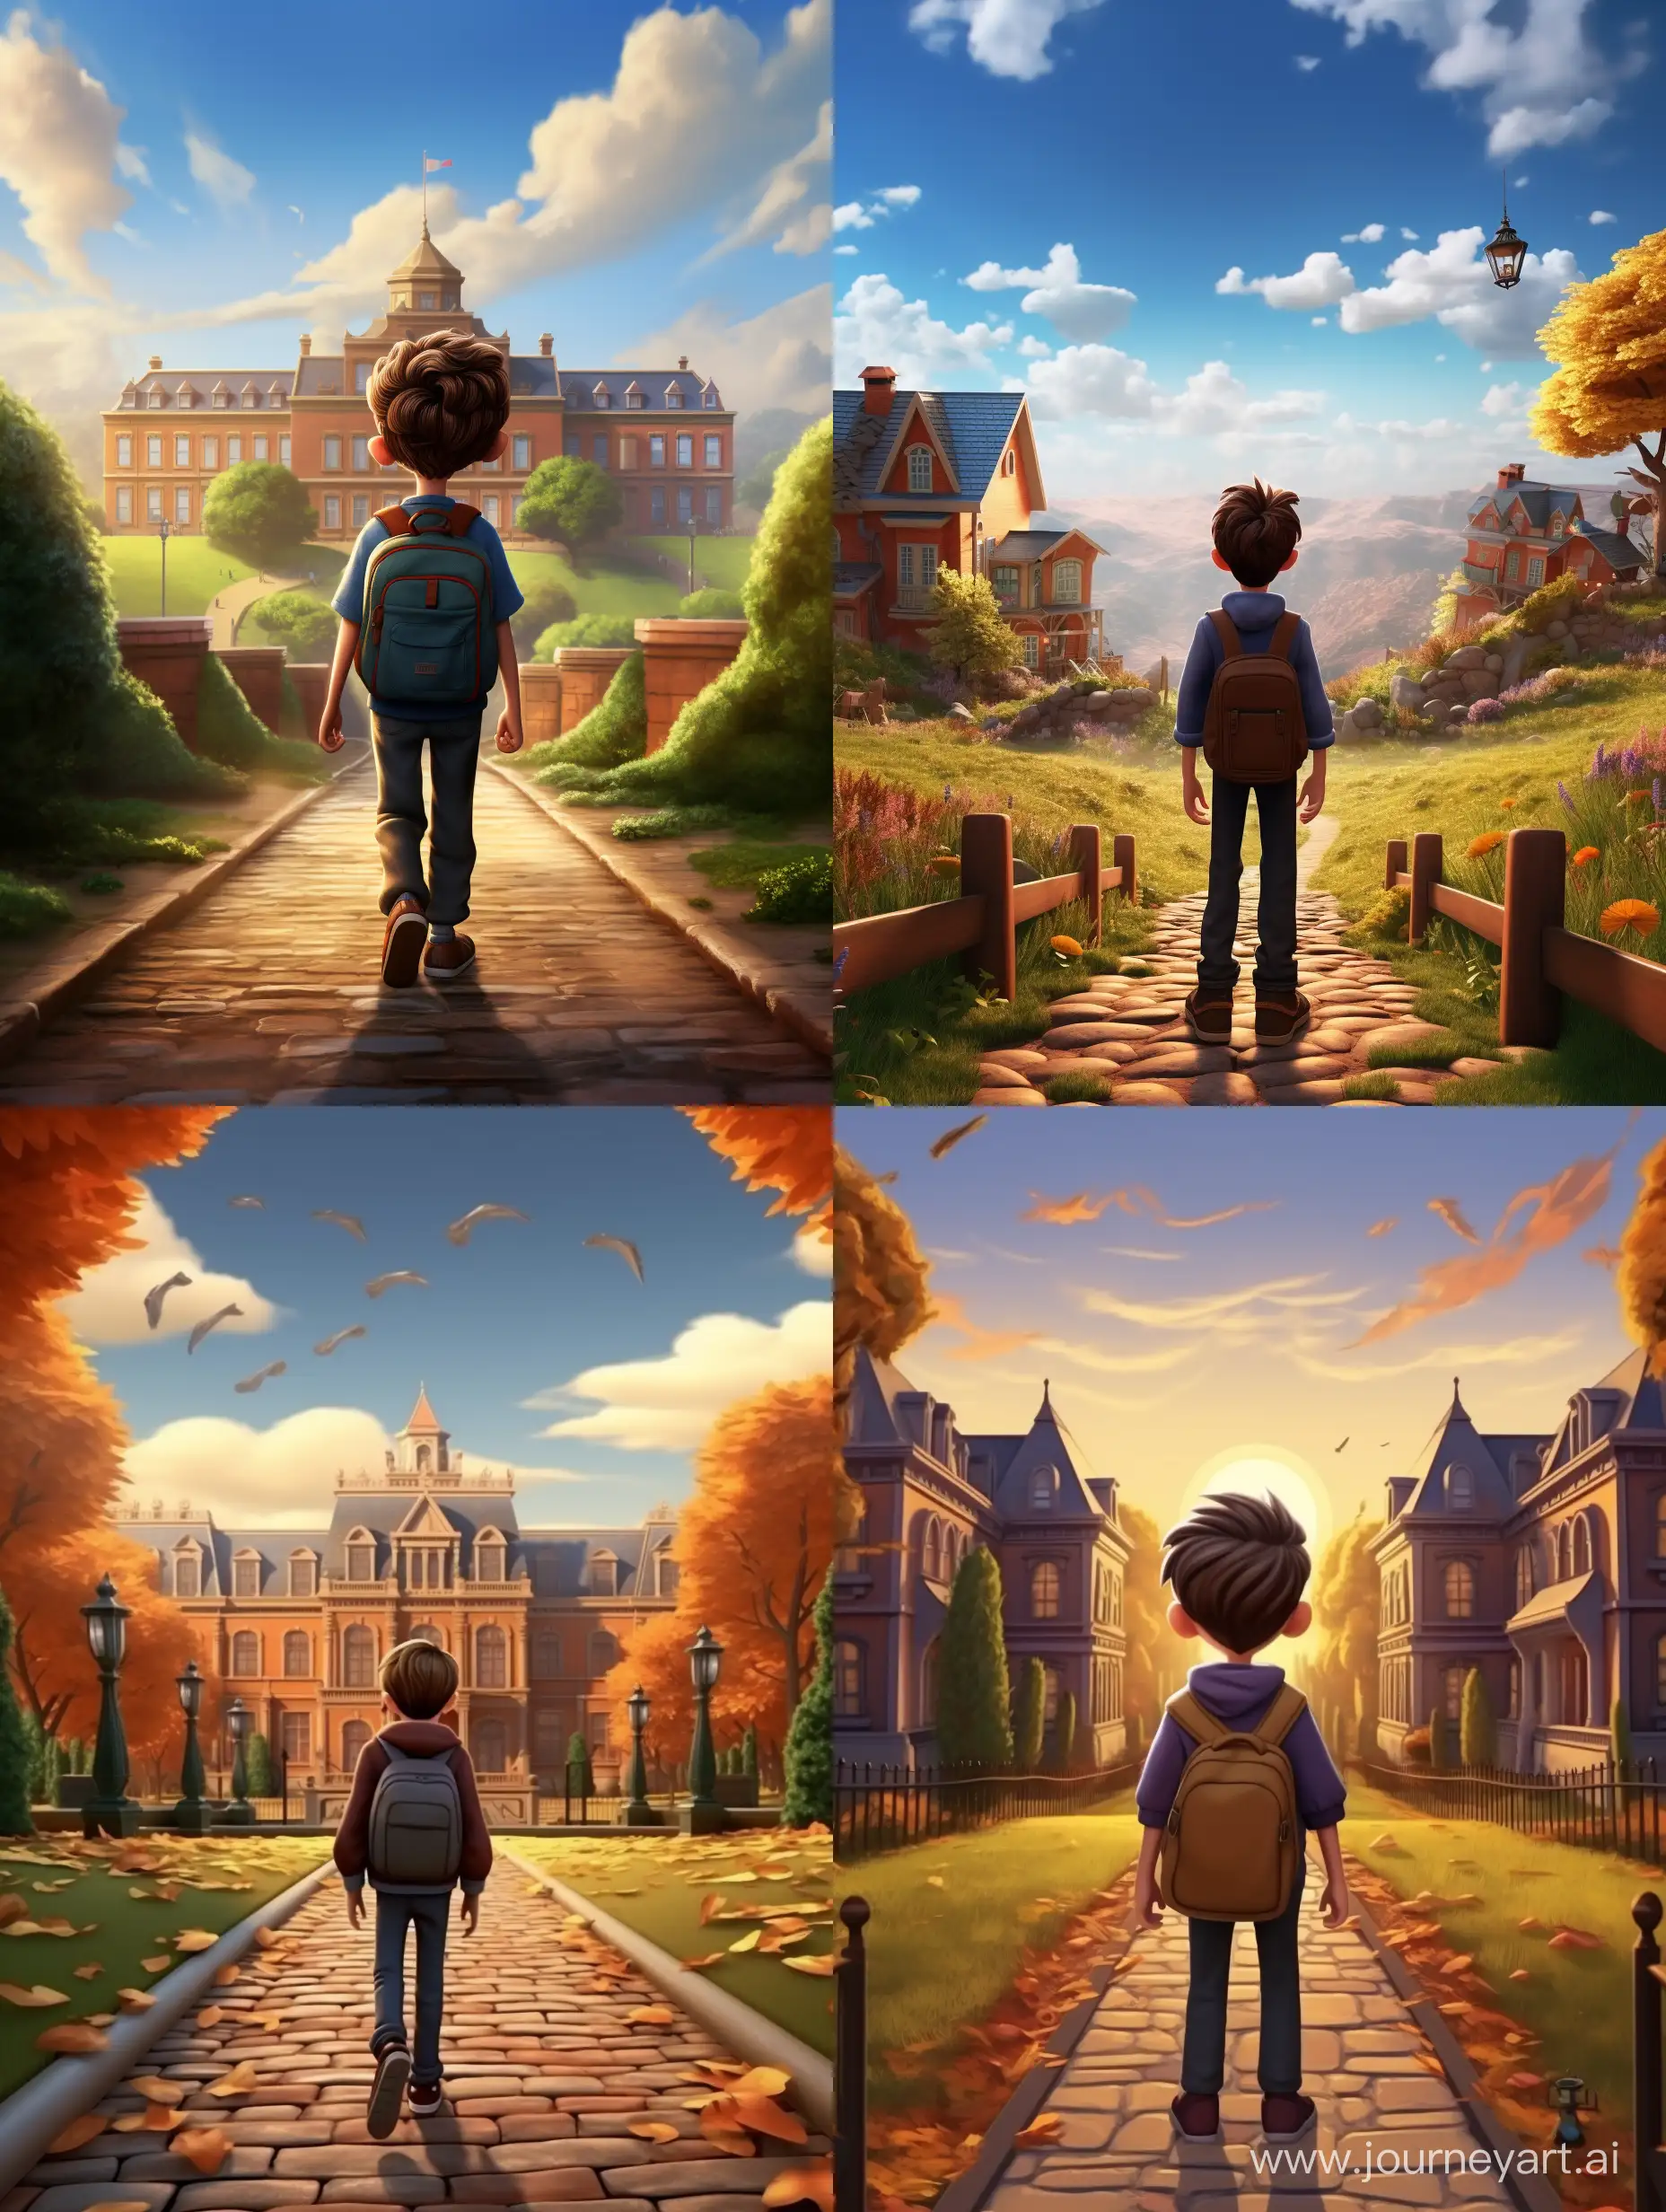 Enchanting-PixarStyle-3D-Animation-of-a-Boys-Journey-to-School